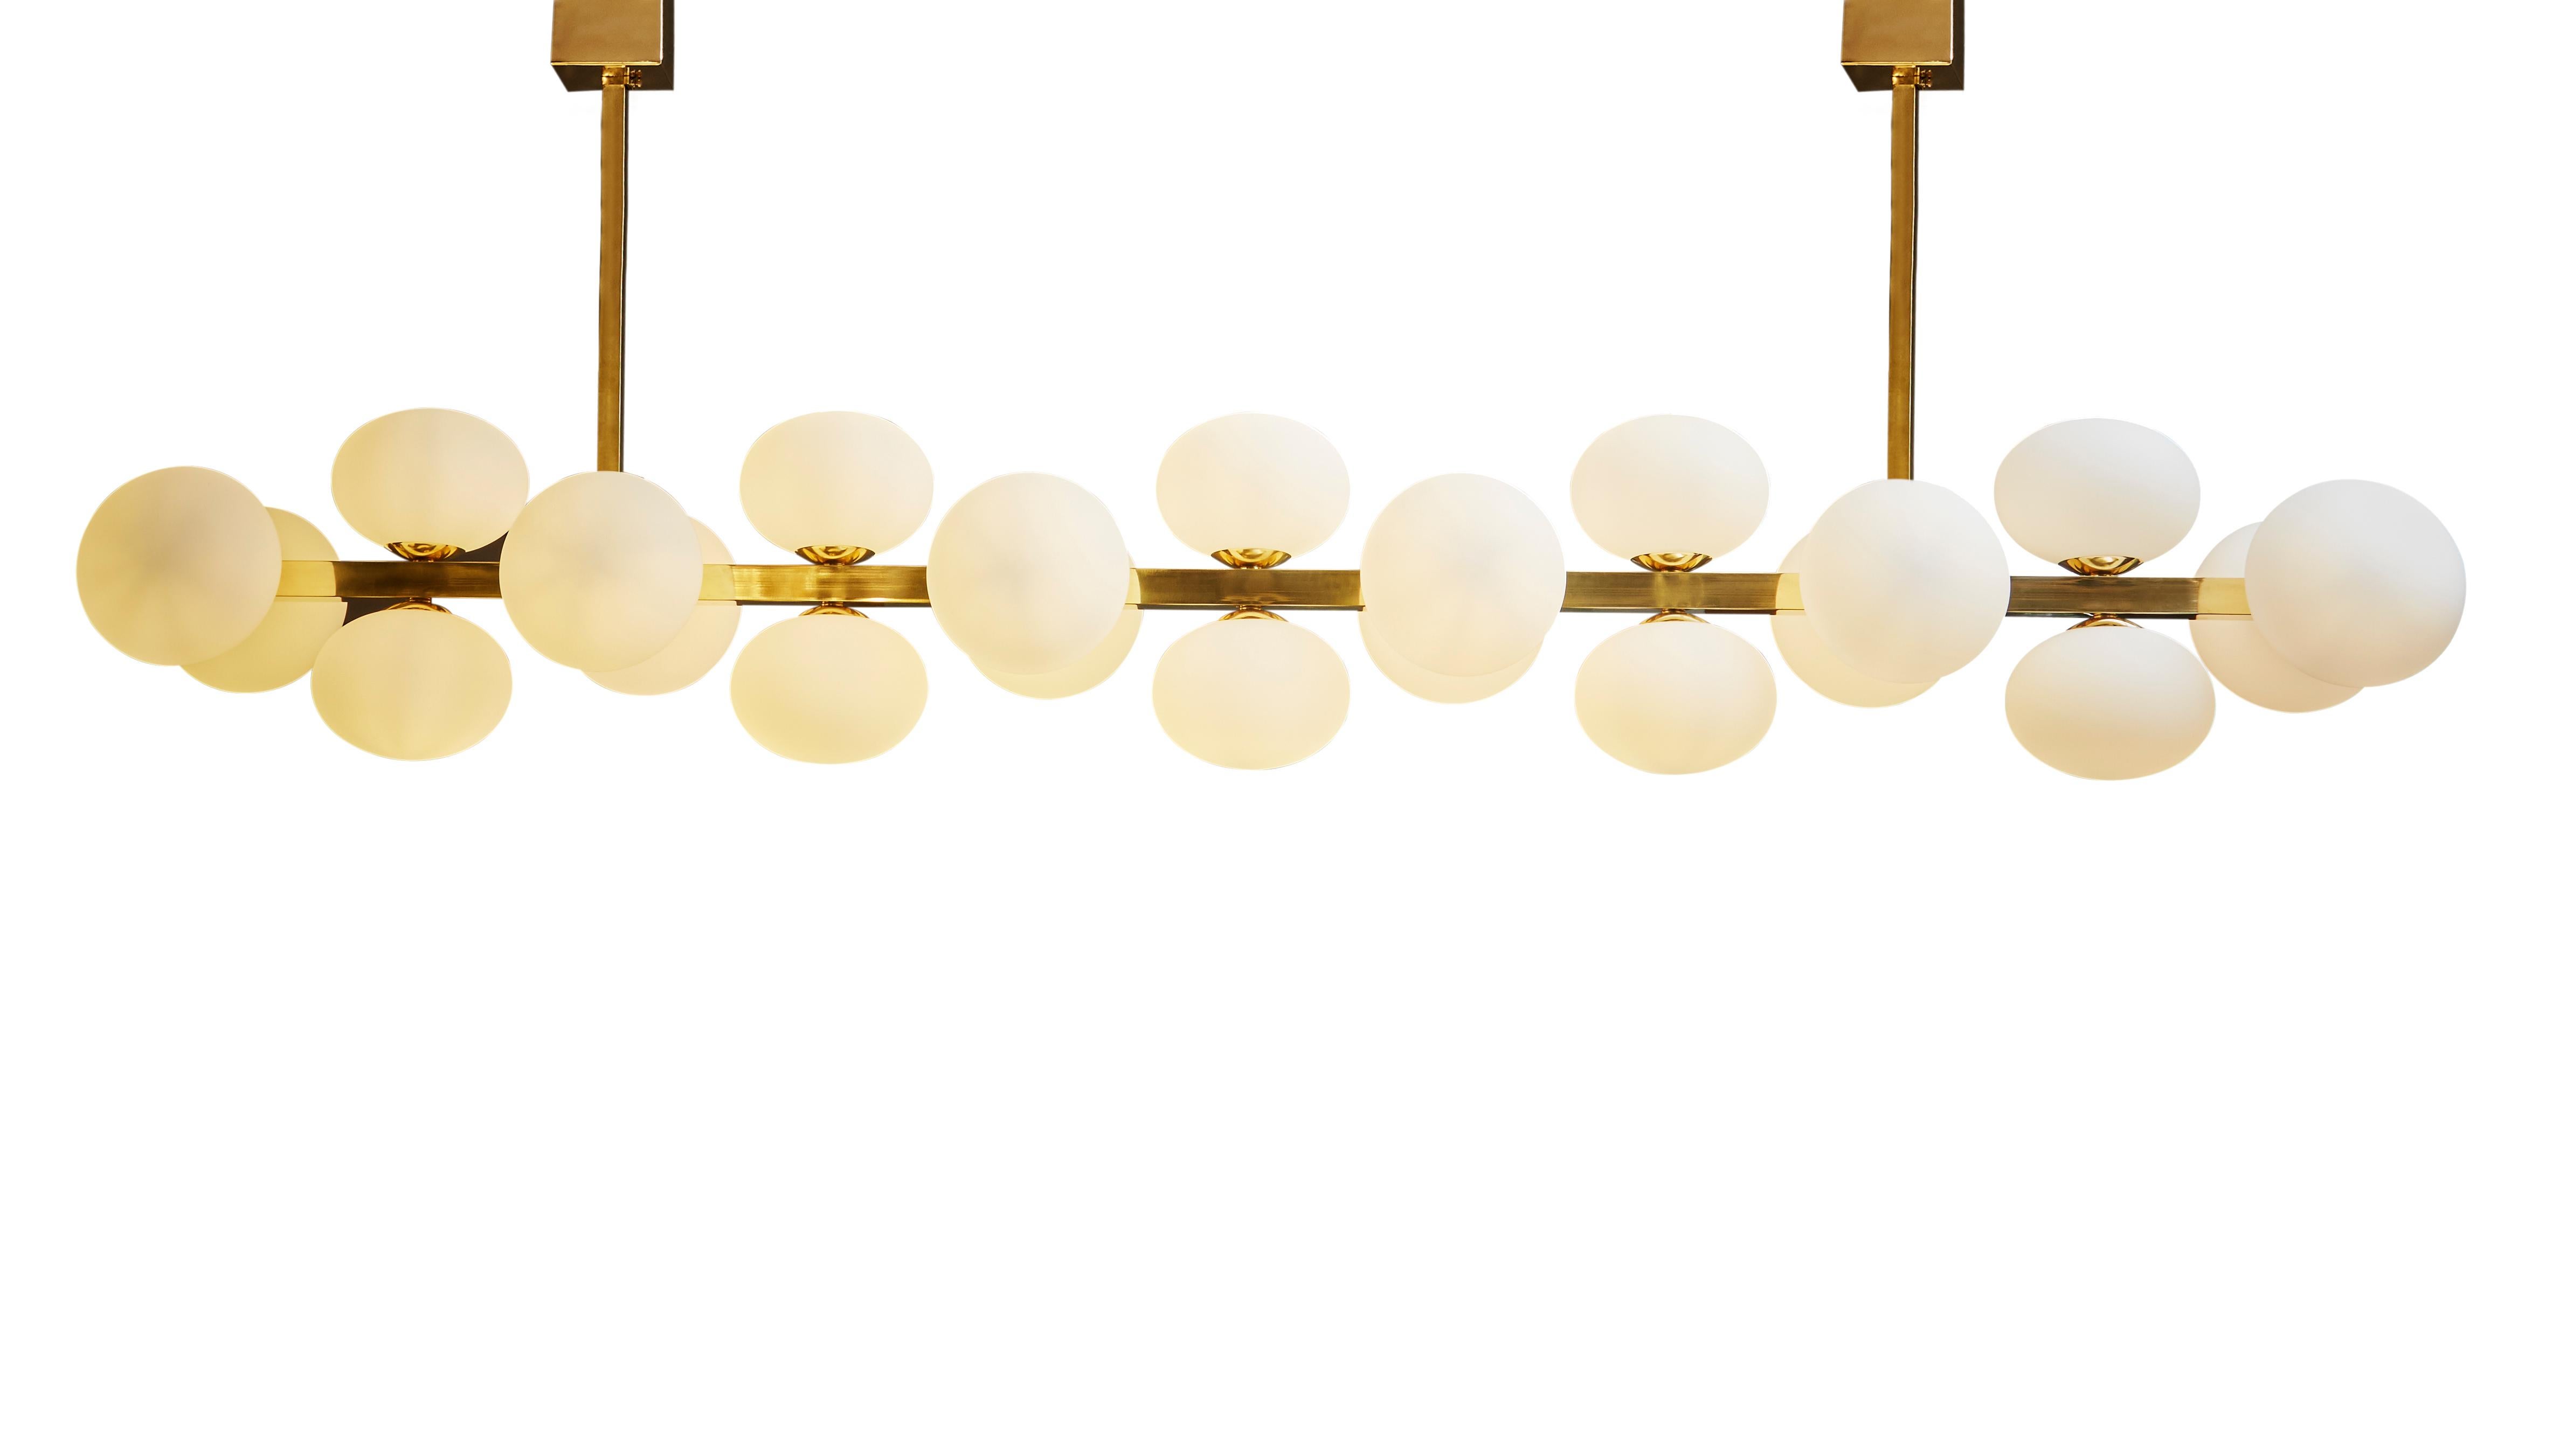 Glustin Luminaires design, wide chandelier made of a square horizontal rod holding twenty two lights incased in opaline globes.